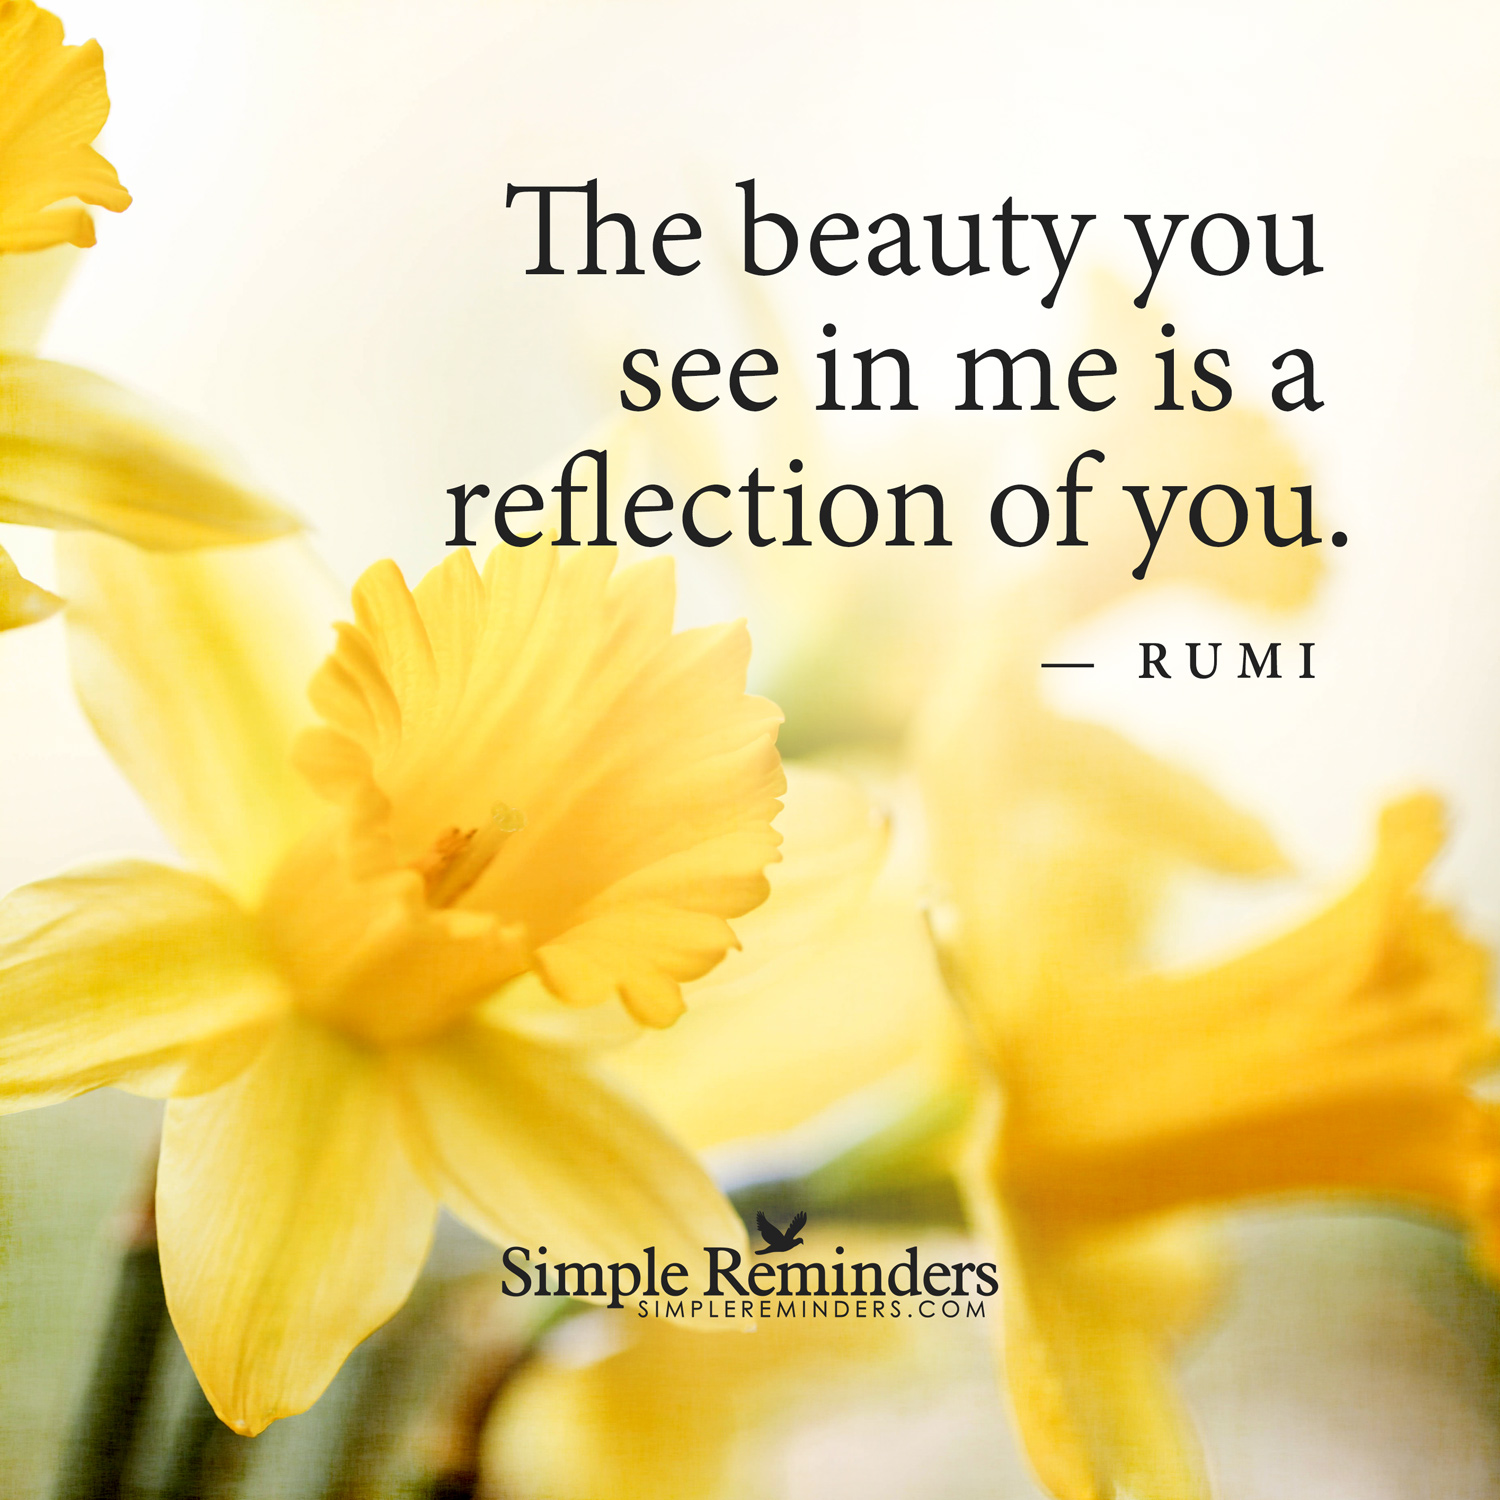 rumibeautyseereflectionyou4t2z 1 - Beautiful Quotes, Proverbs, Sayings